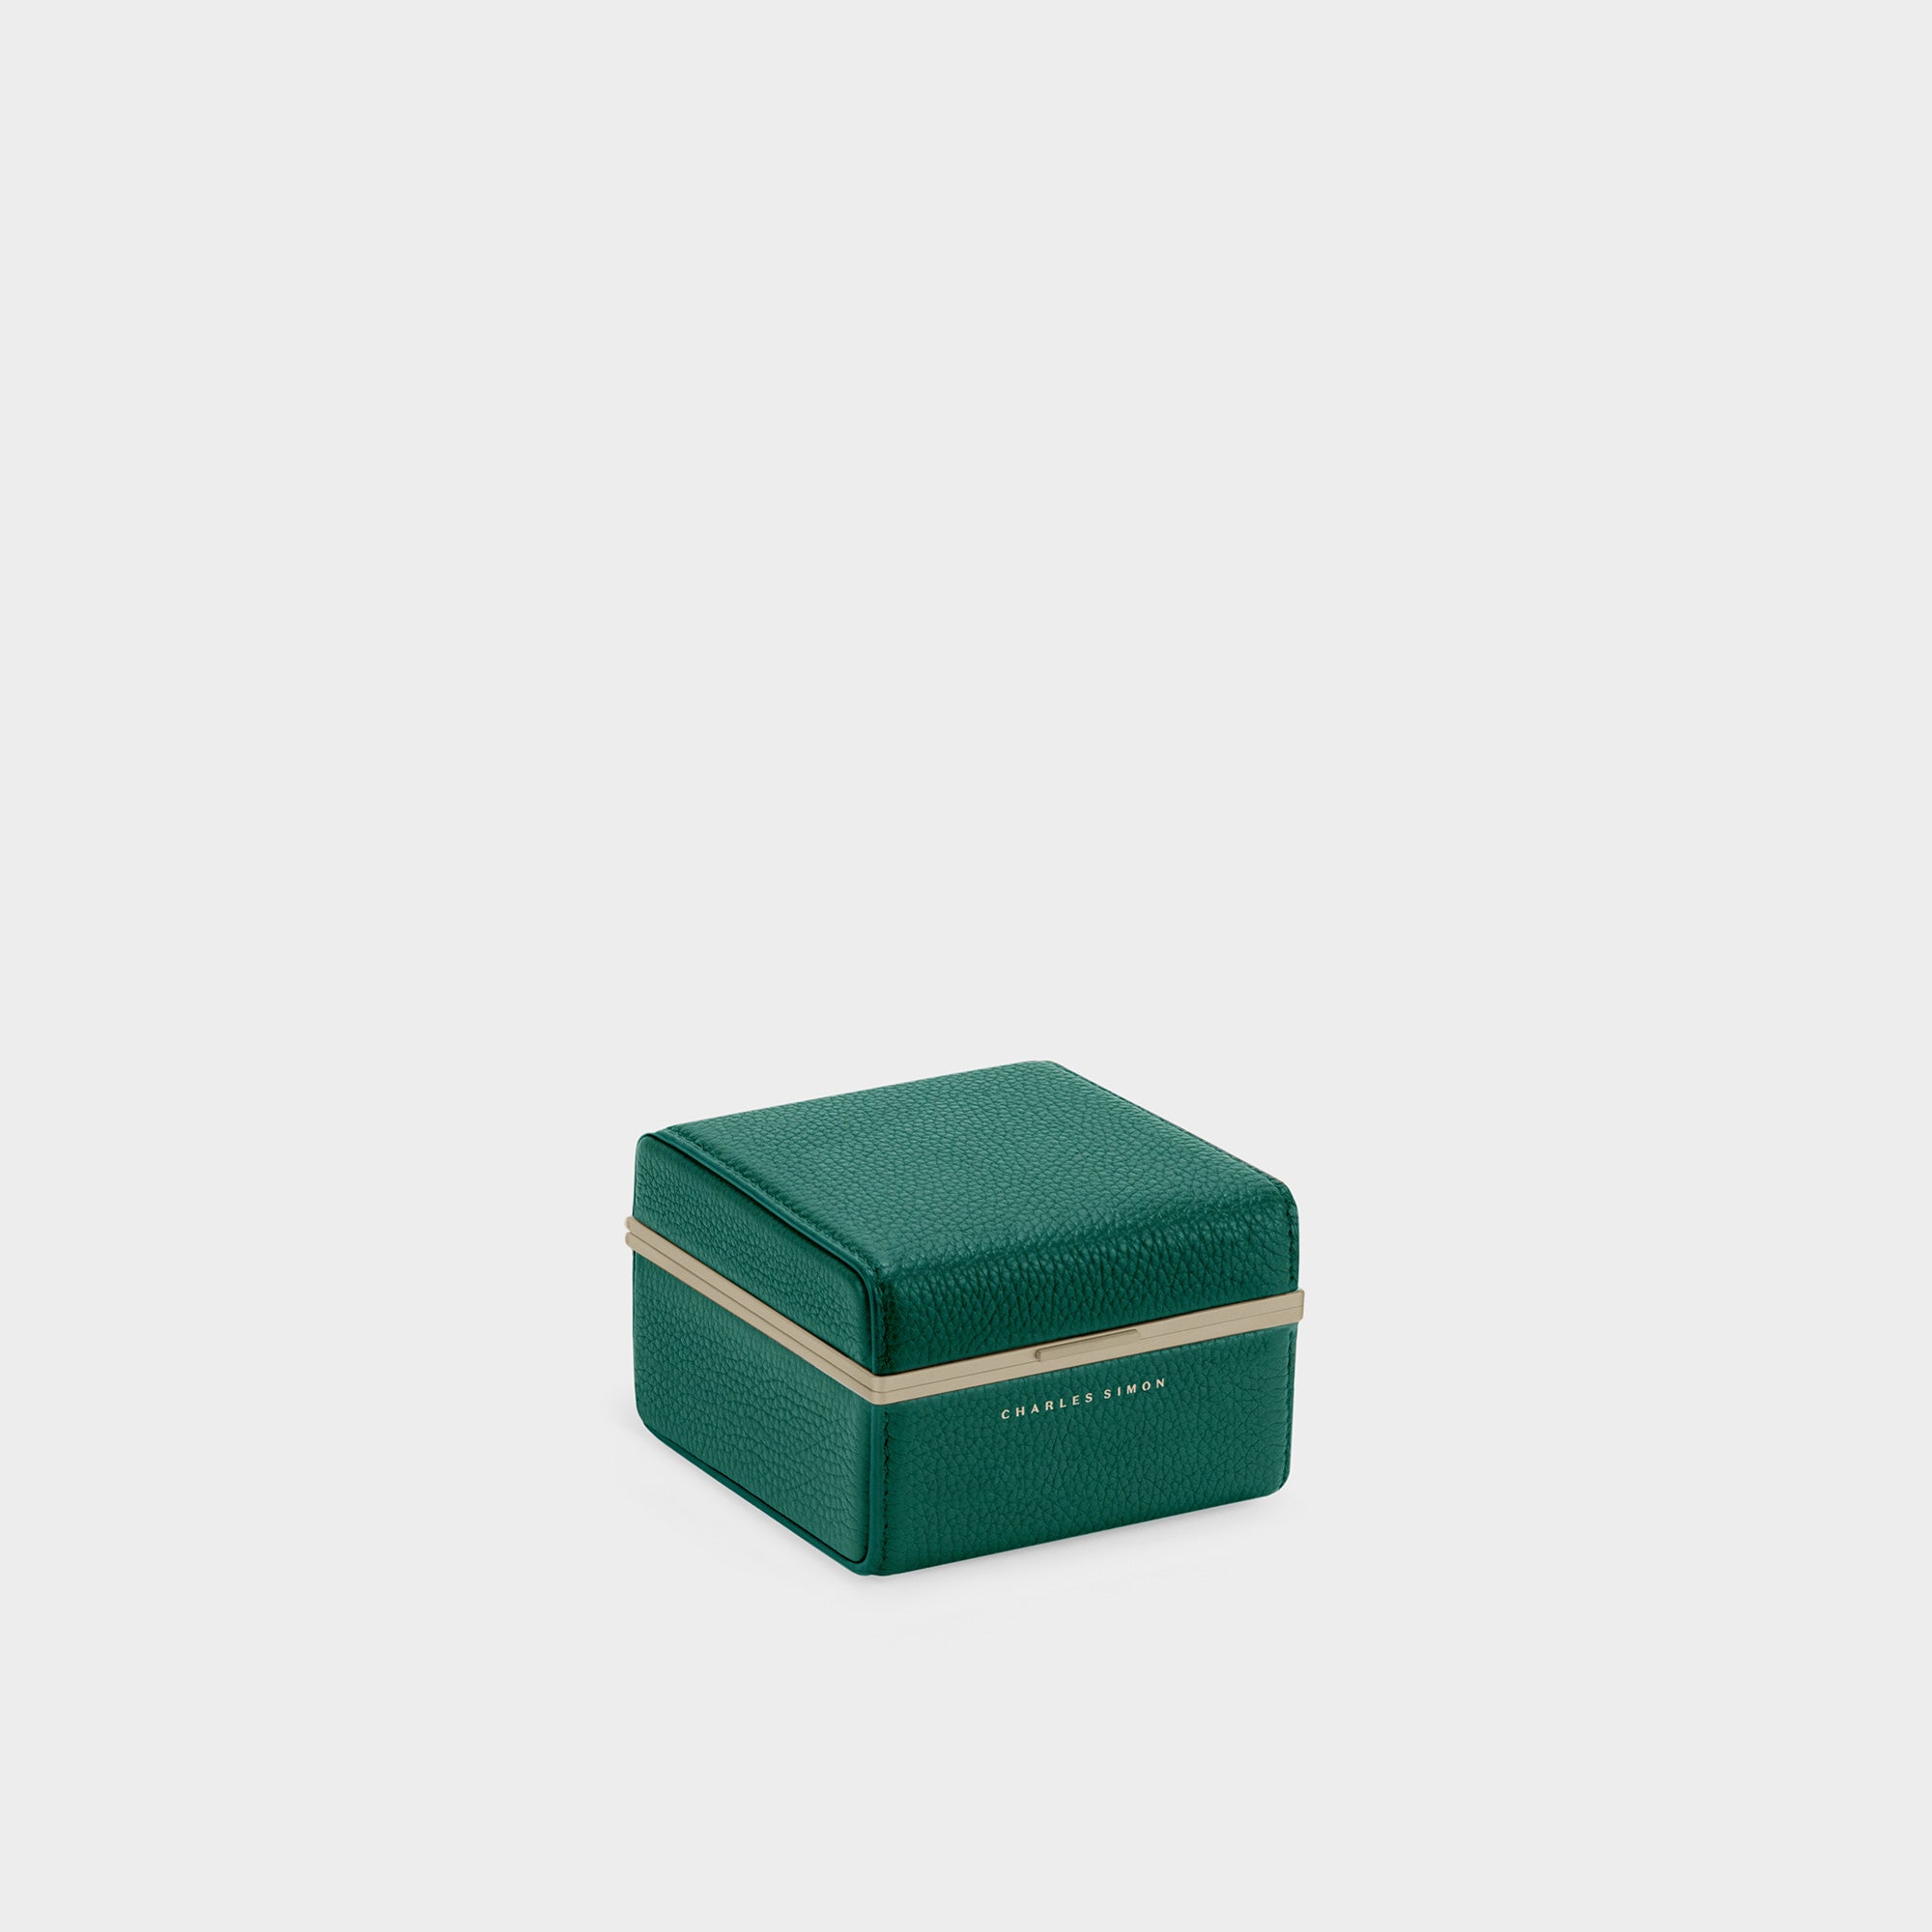 Product photo of closed Eaton 1 Watch case for 1 watch in gold aluminum and emerald leather. Handcrafted in Canada.